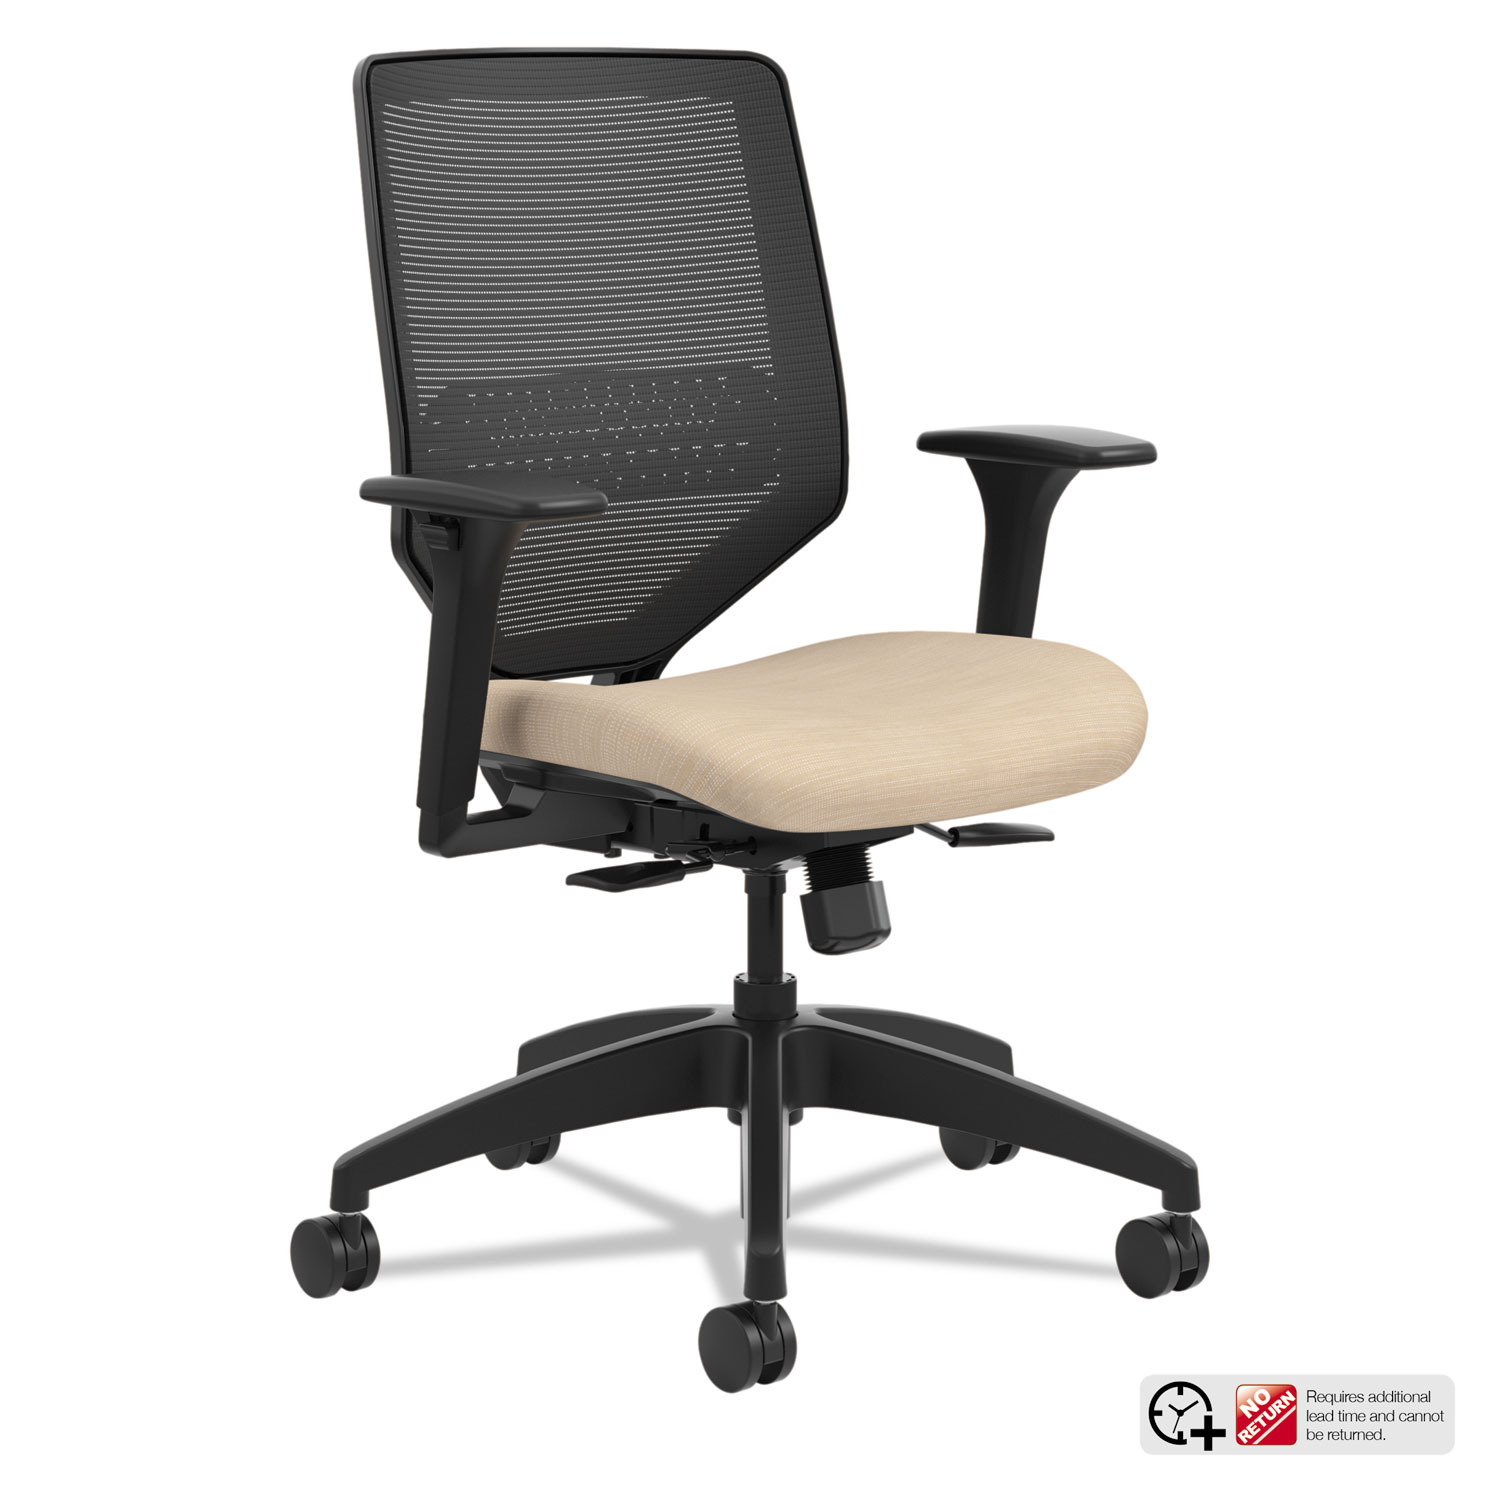  HON SVM1ALC22TK Solve Series Mesh Back Task Chair, Supports up to 300 lbs., Putty Seat, Black Back, Black Base (HONSVM1ALC22TK) 